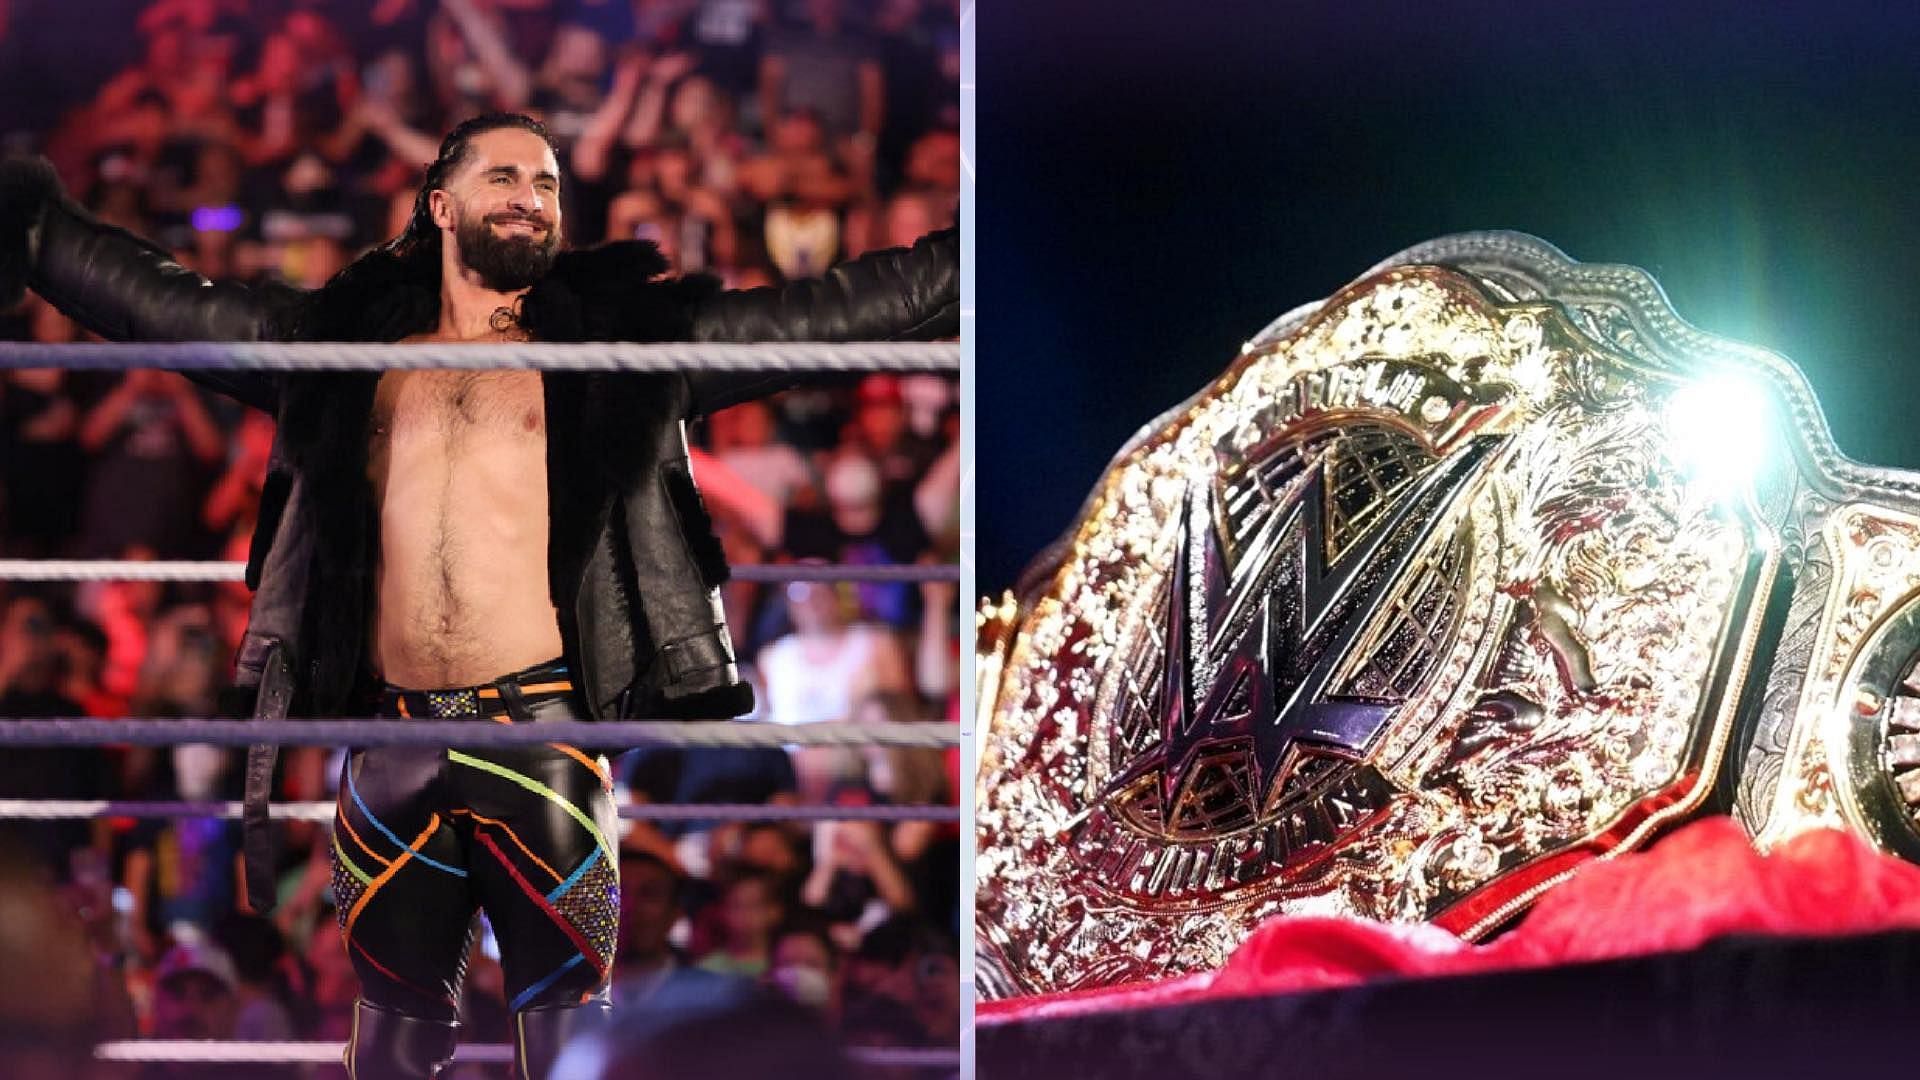 Seth Rollins is amongst the leading candidates to win the World Heavyweight Championship